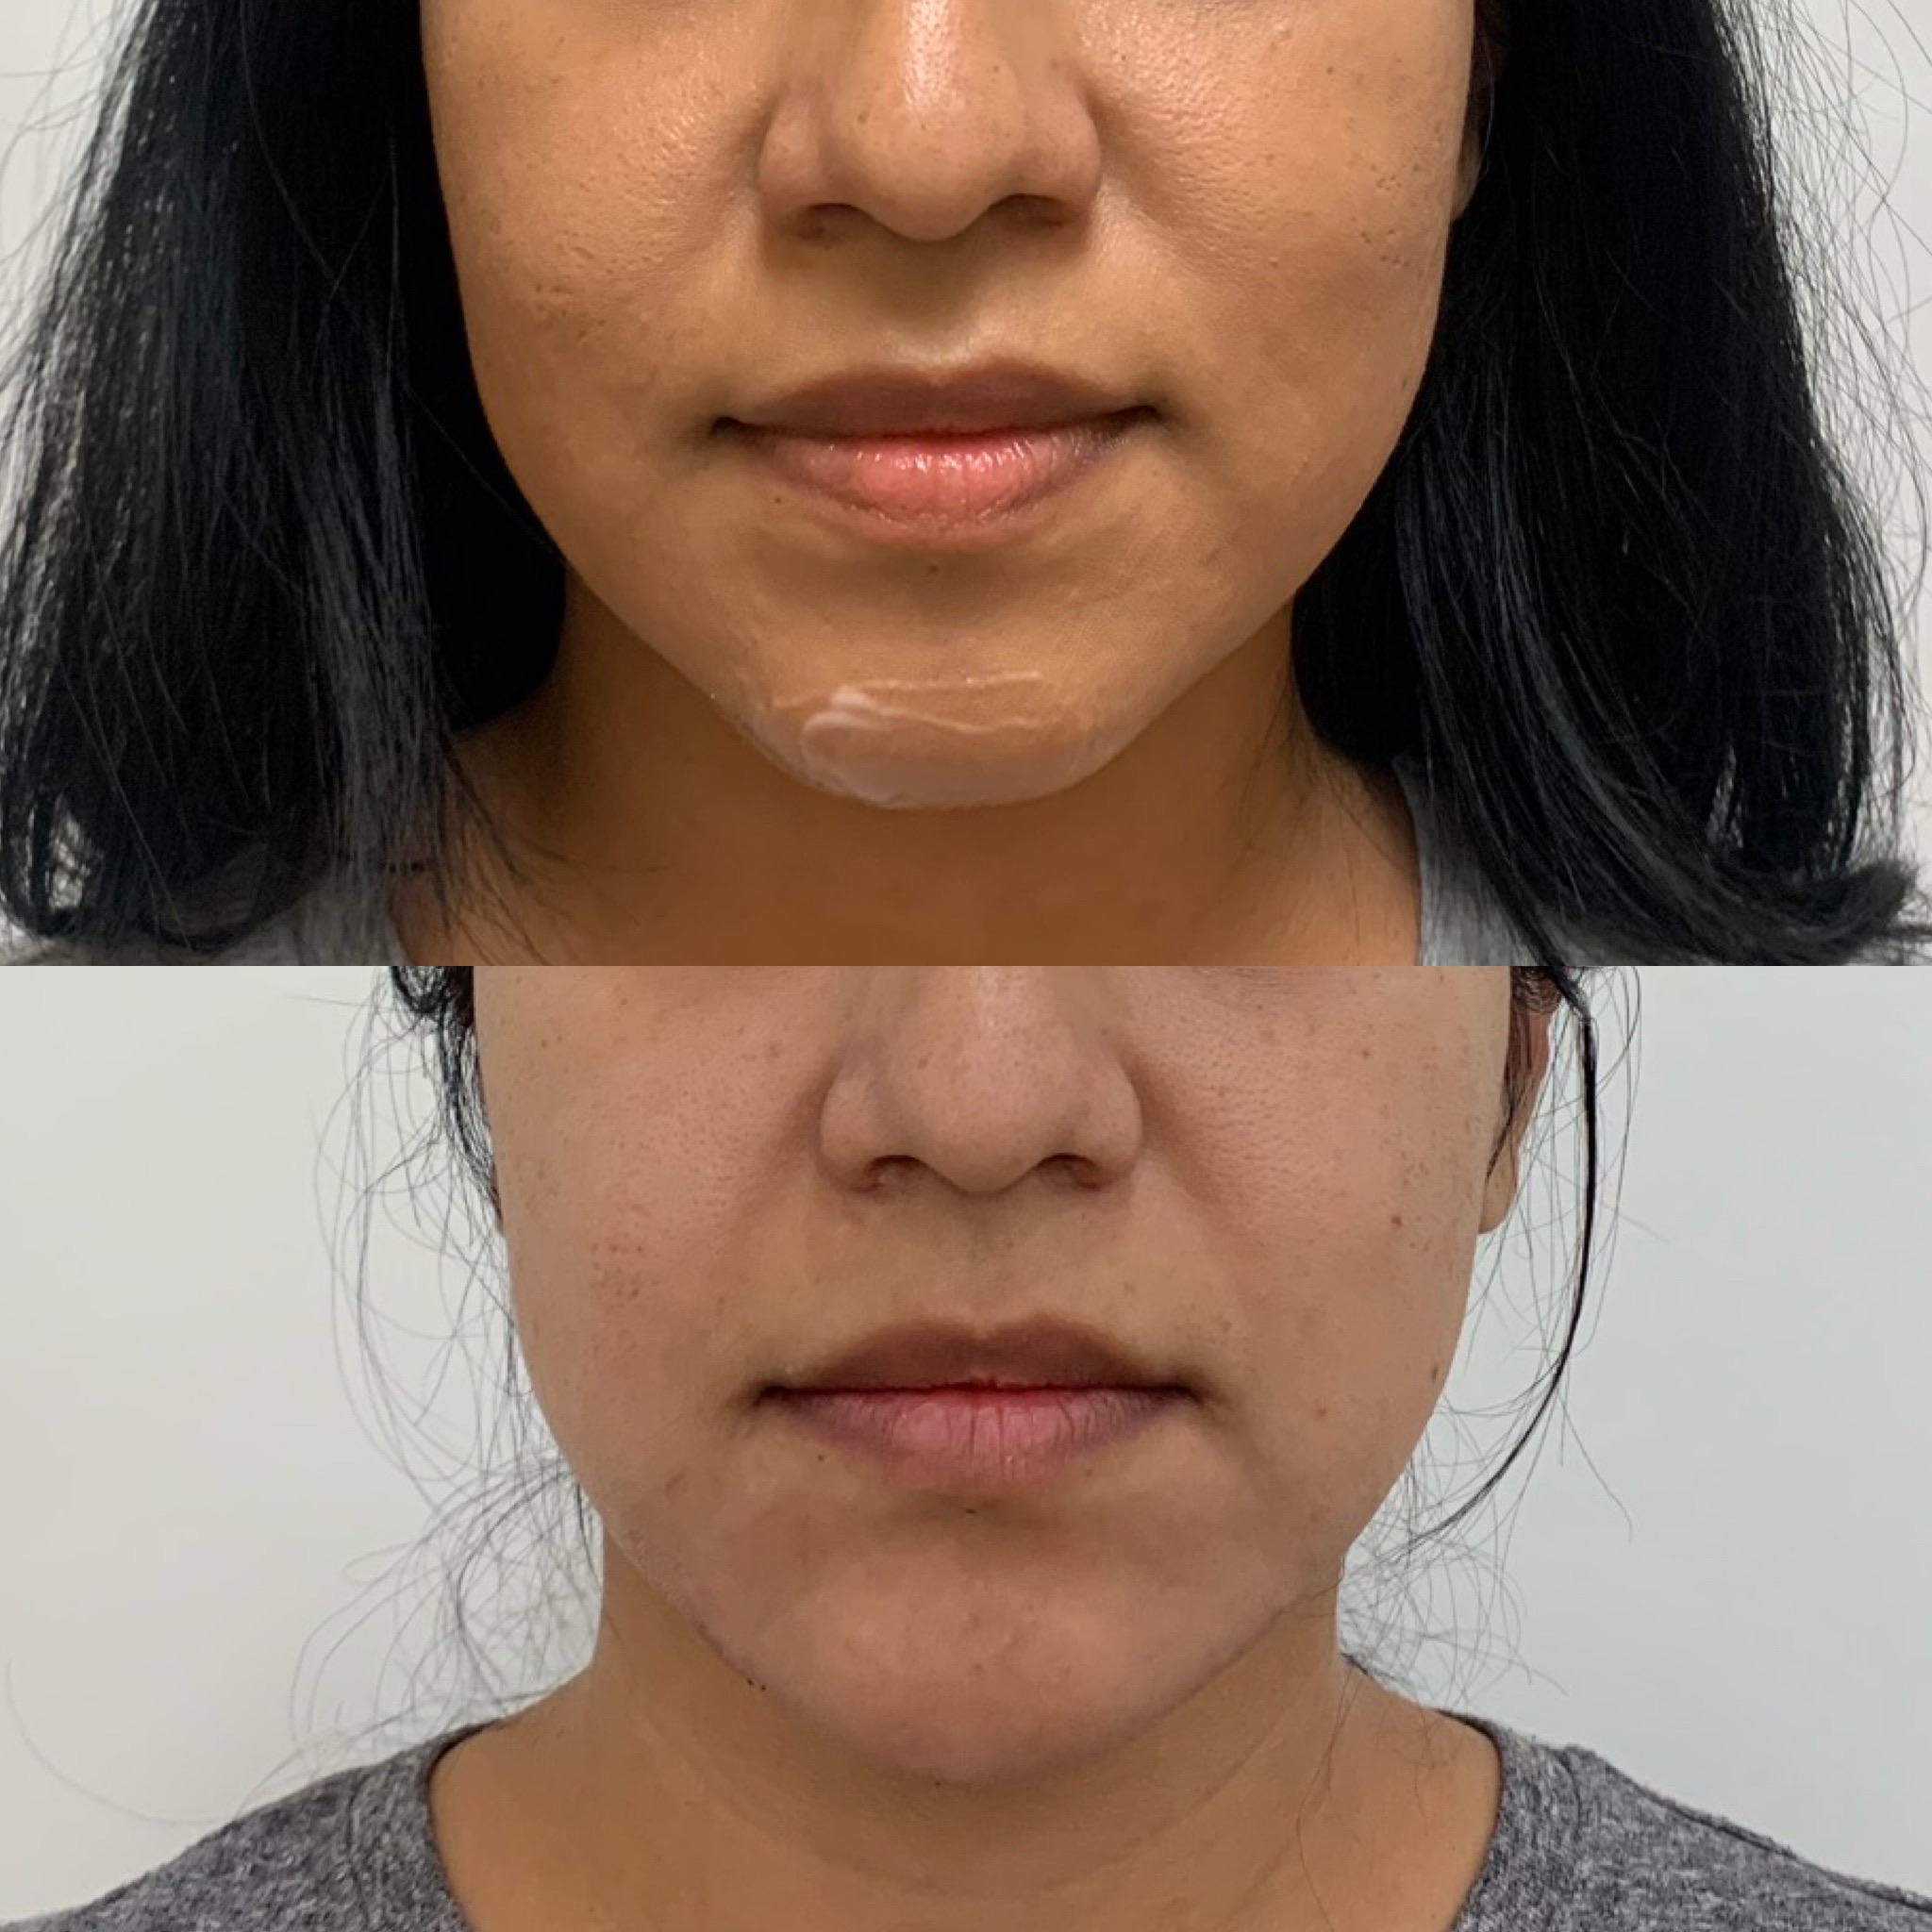 Before and After Fillers Treatment | Beauty Boost Med Spa in Newport Beach, CA